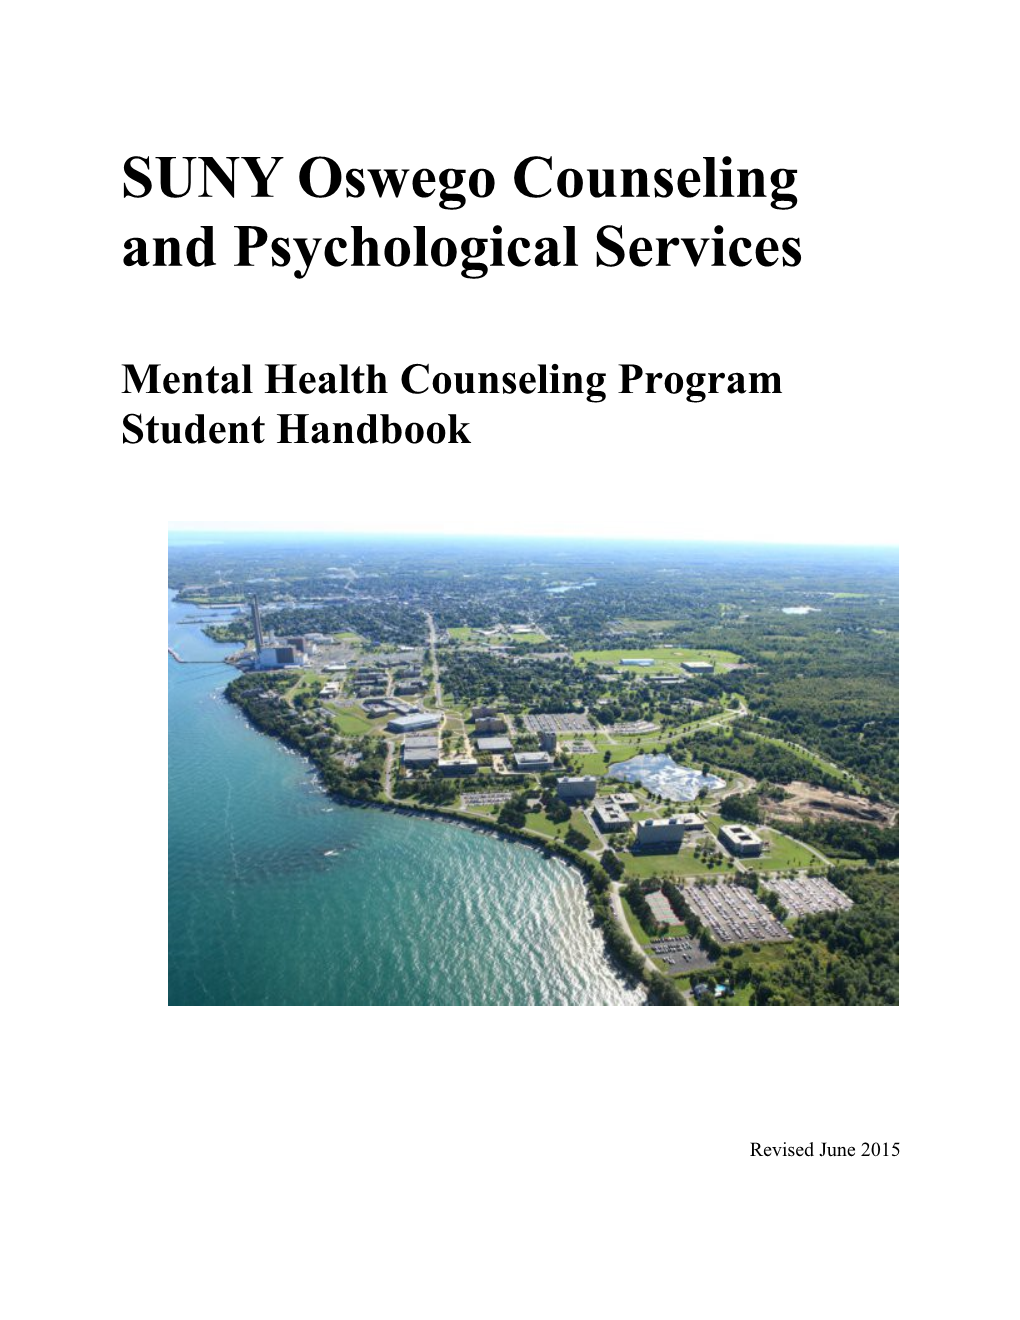 SUNY Oswego Counseling and Psychological Services